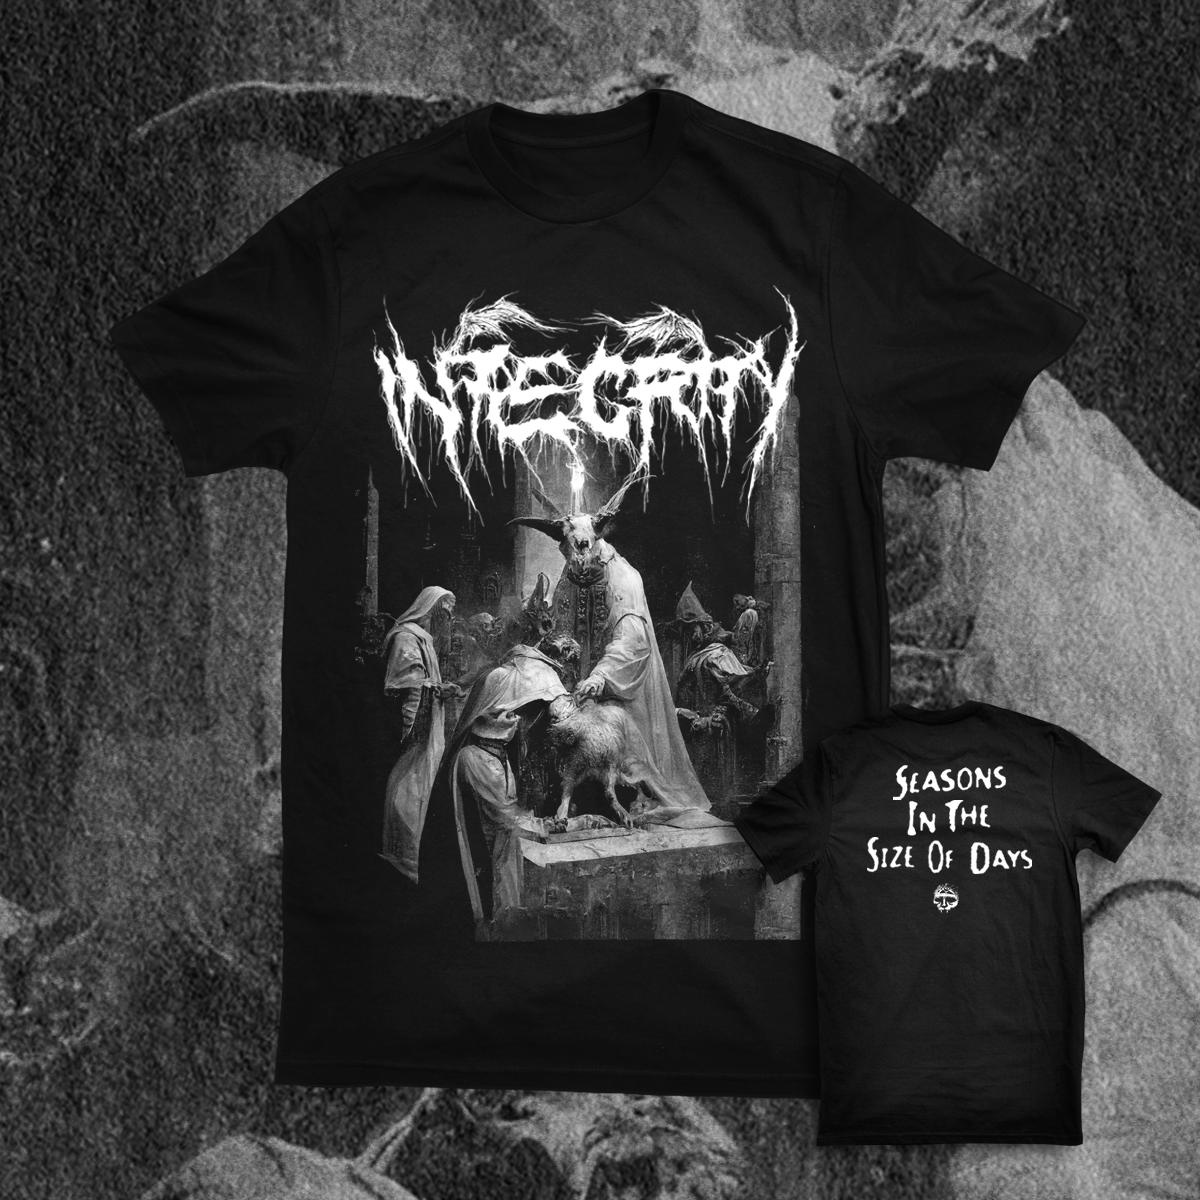 INTEGRITY "SEASONS IN THE SIZE OF DAYS" SHIRT